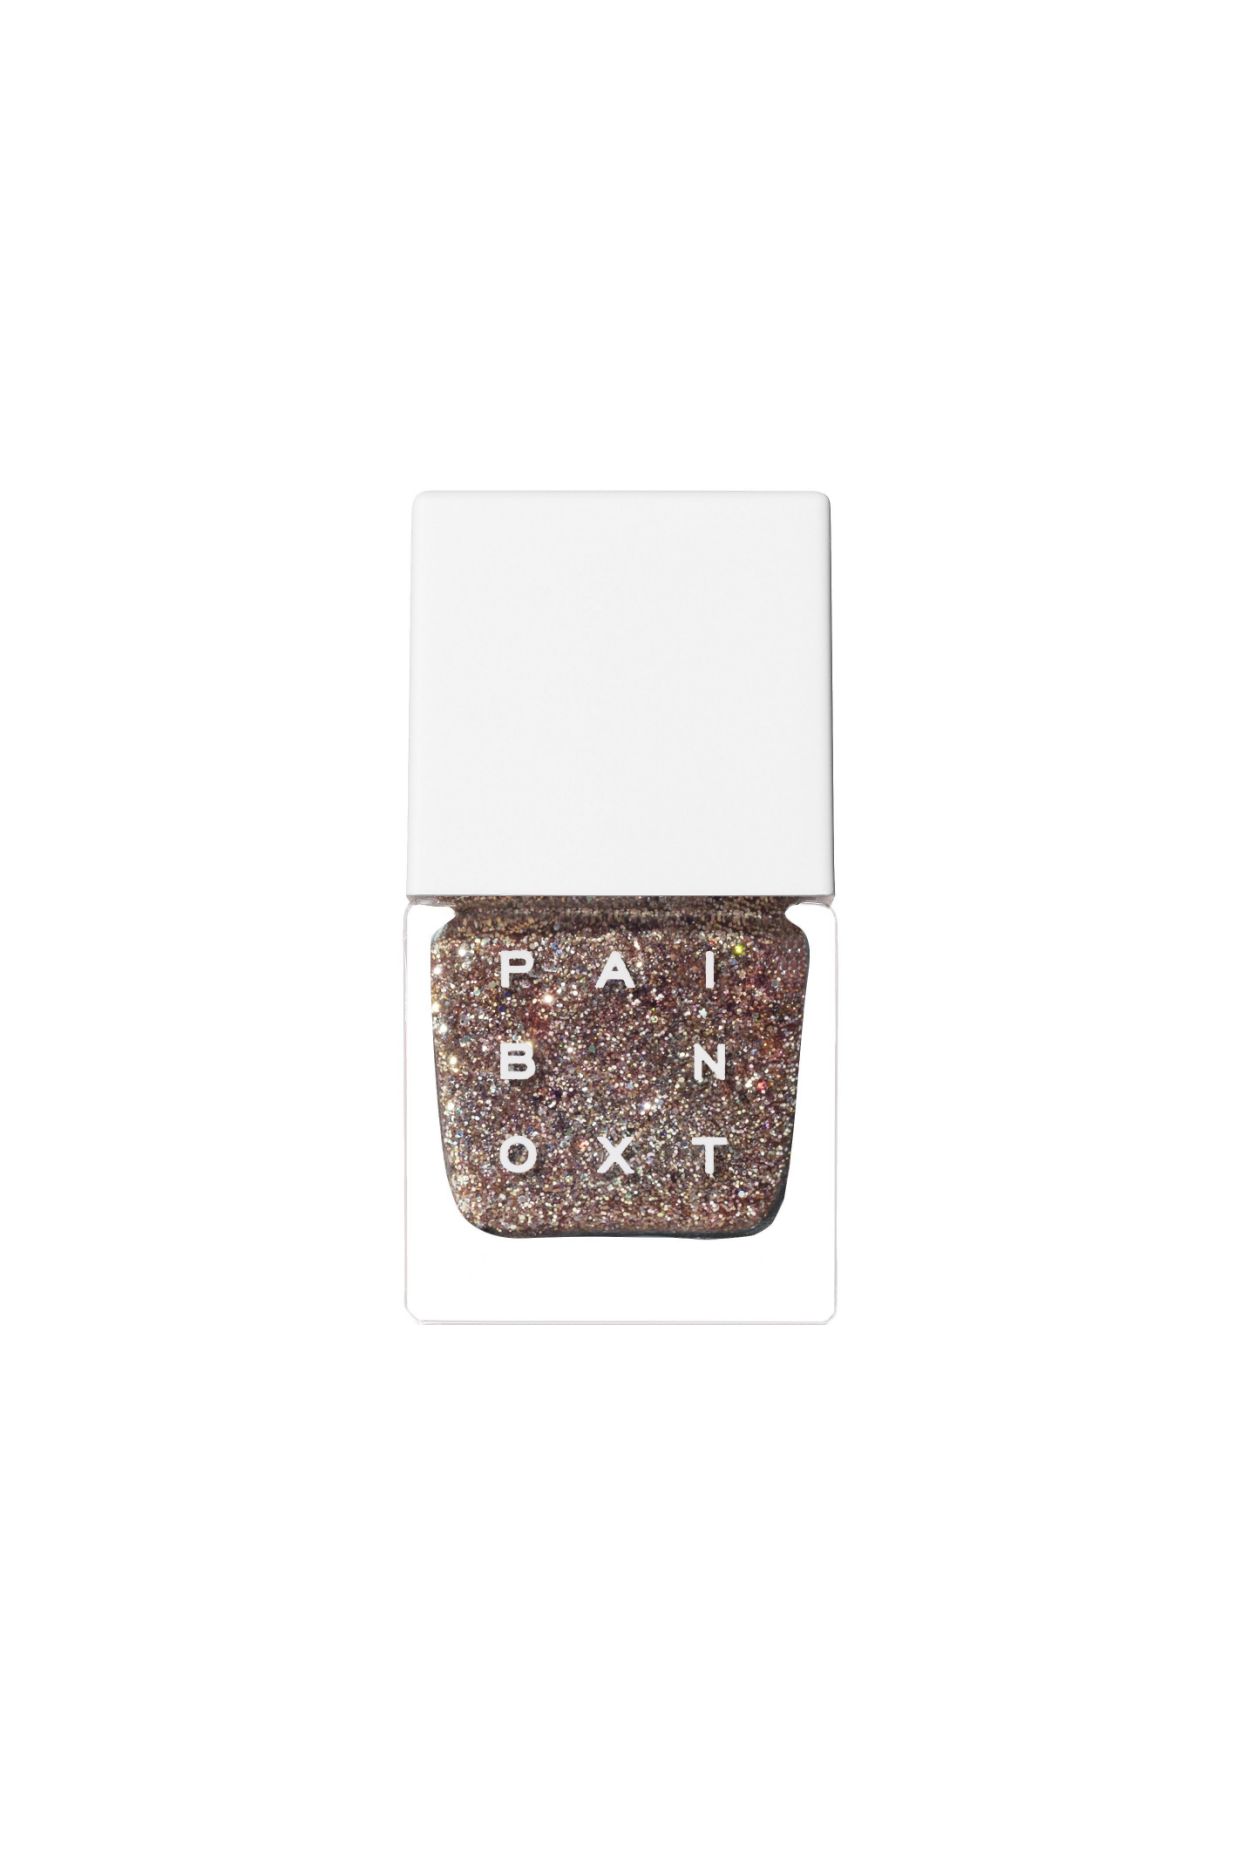 <h3><strong>Paintbox Nail Polish in Like Magic</strong></h3> <p>Everyone needs a sparkly polish in their collection, and this one is perfect because it has a champagne pearl base and fine-grain gold flecks that give your nails a sophisticated kind of shine.</p> <br> <br> <strong>Paintbox</strong> Nail Lacquer in Like Magic, $22, available at <a href="https://paint-box.com/products/nail-lacquer-like-magic" rel="nofollow noopener" target="_blank" data-ylk="slk:Paintbox" class="link rapid-noclick-resp">Paintbox</a>